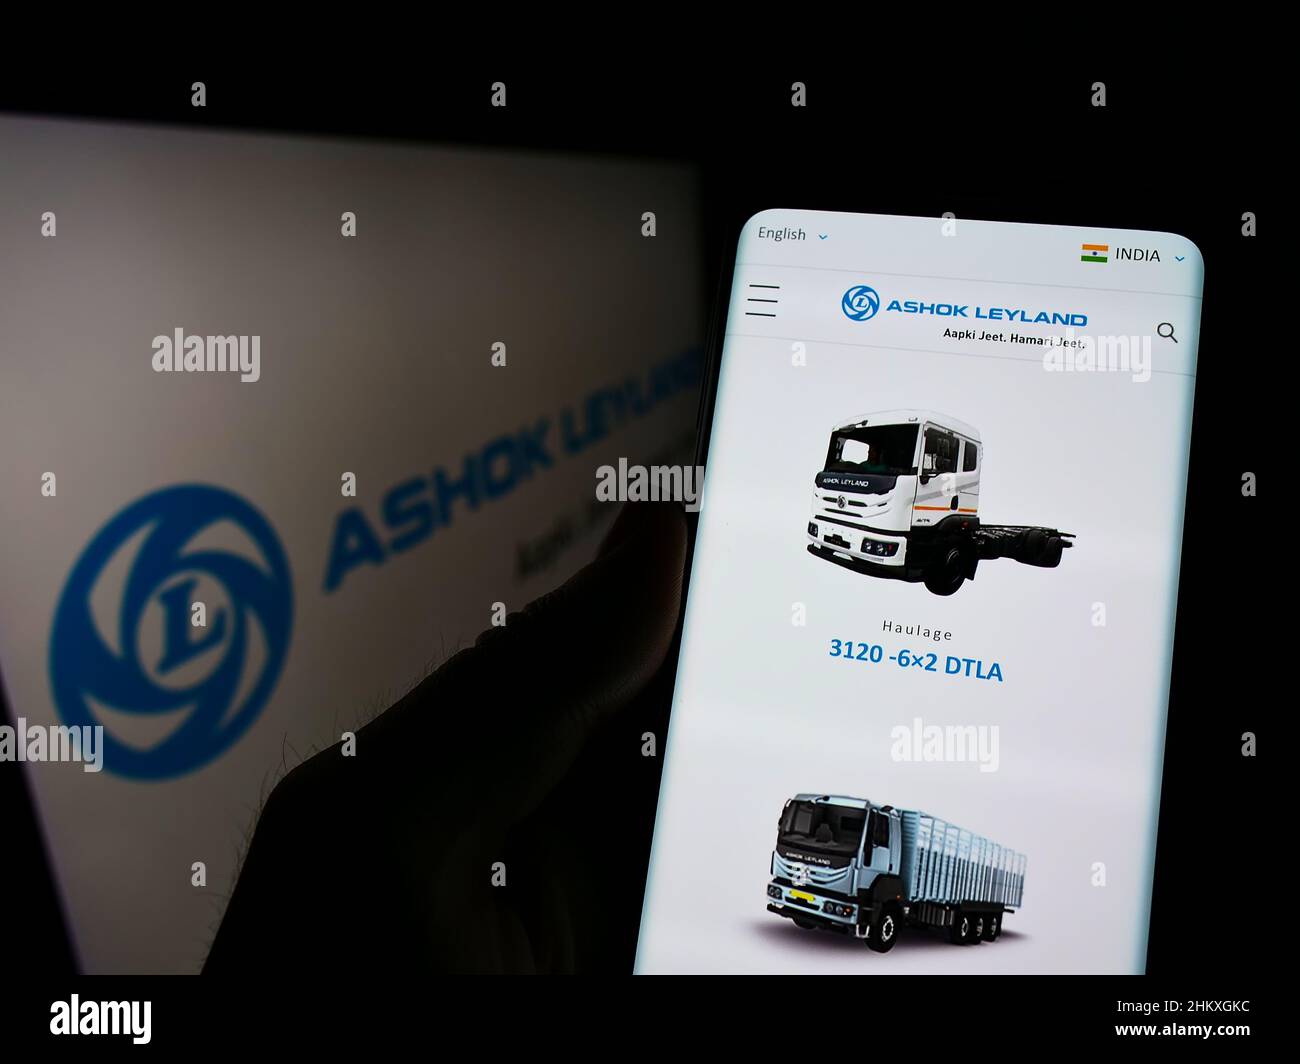 Person holding cellphone with website of Indian automotive company Ashok Leyland Ltd. on screen in front of logo. Focus on center of phone display. Stock Photo